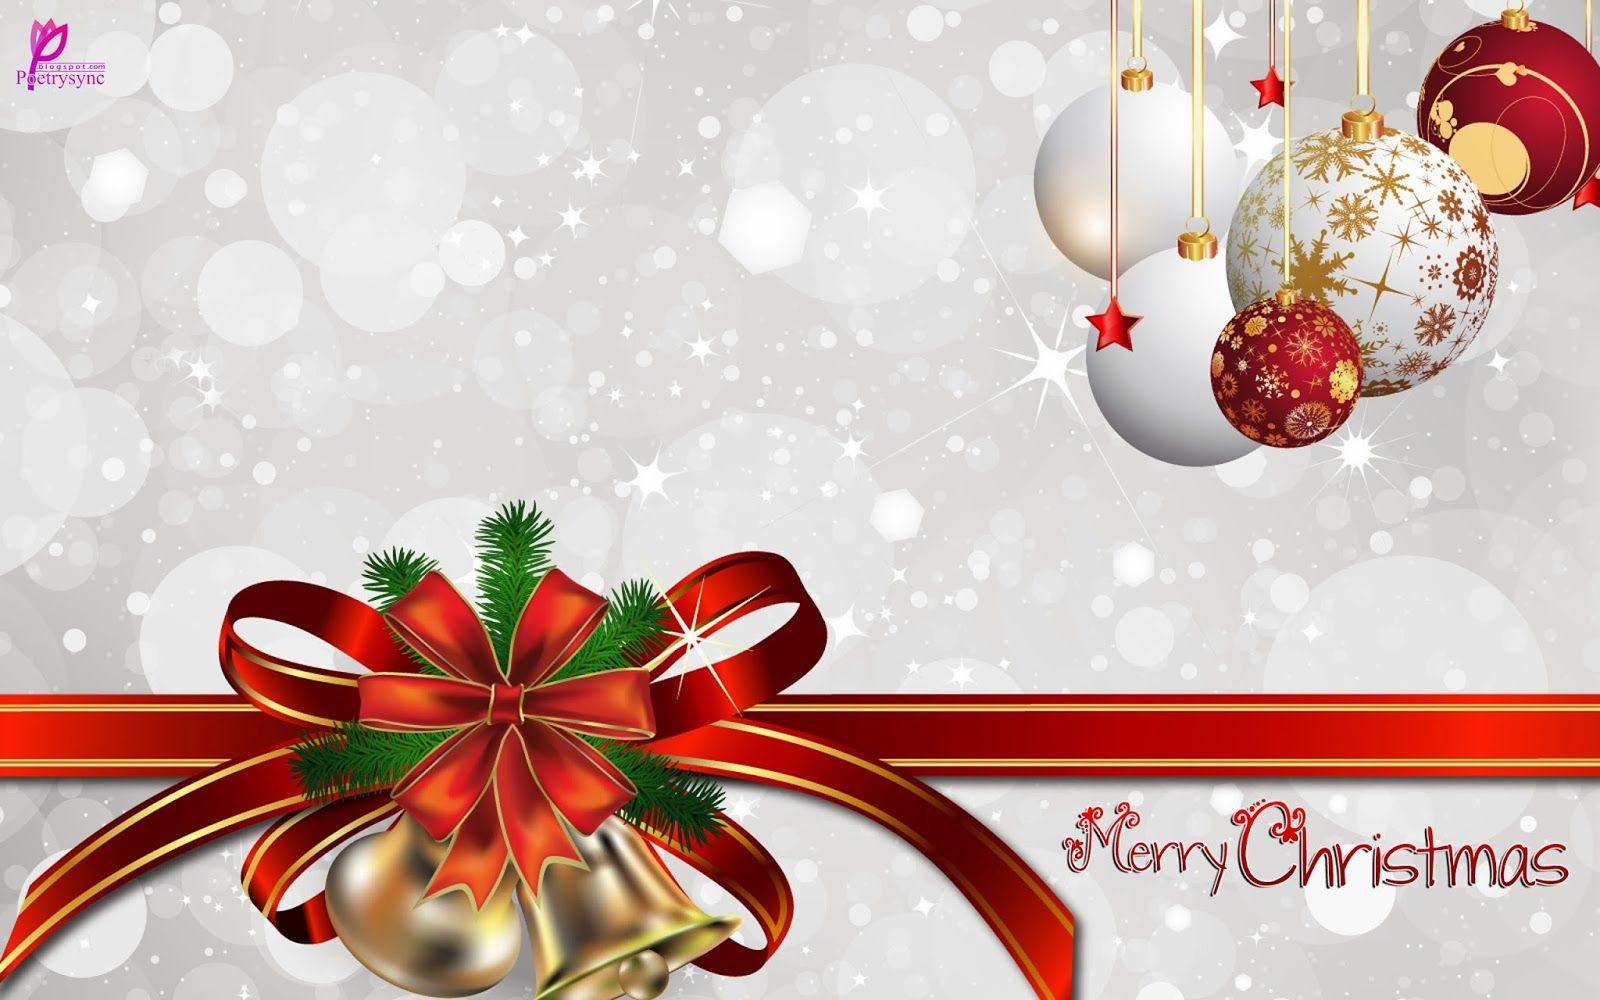 Merry Chrismast and Happy New Year: Christmas HD Wallpapers Collection